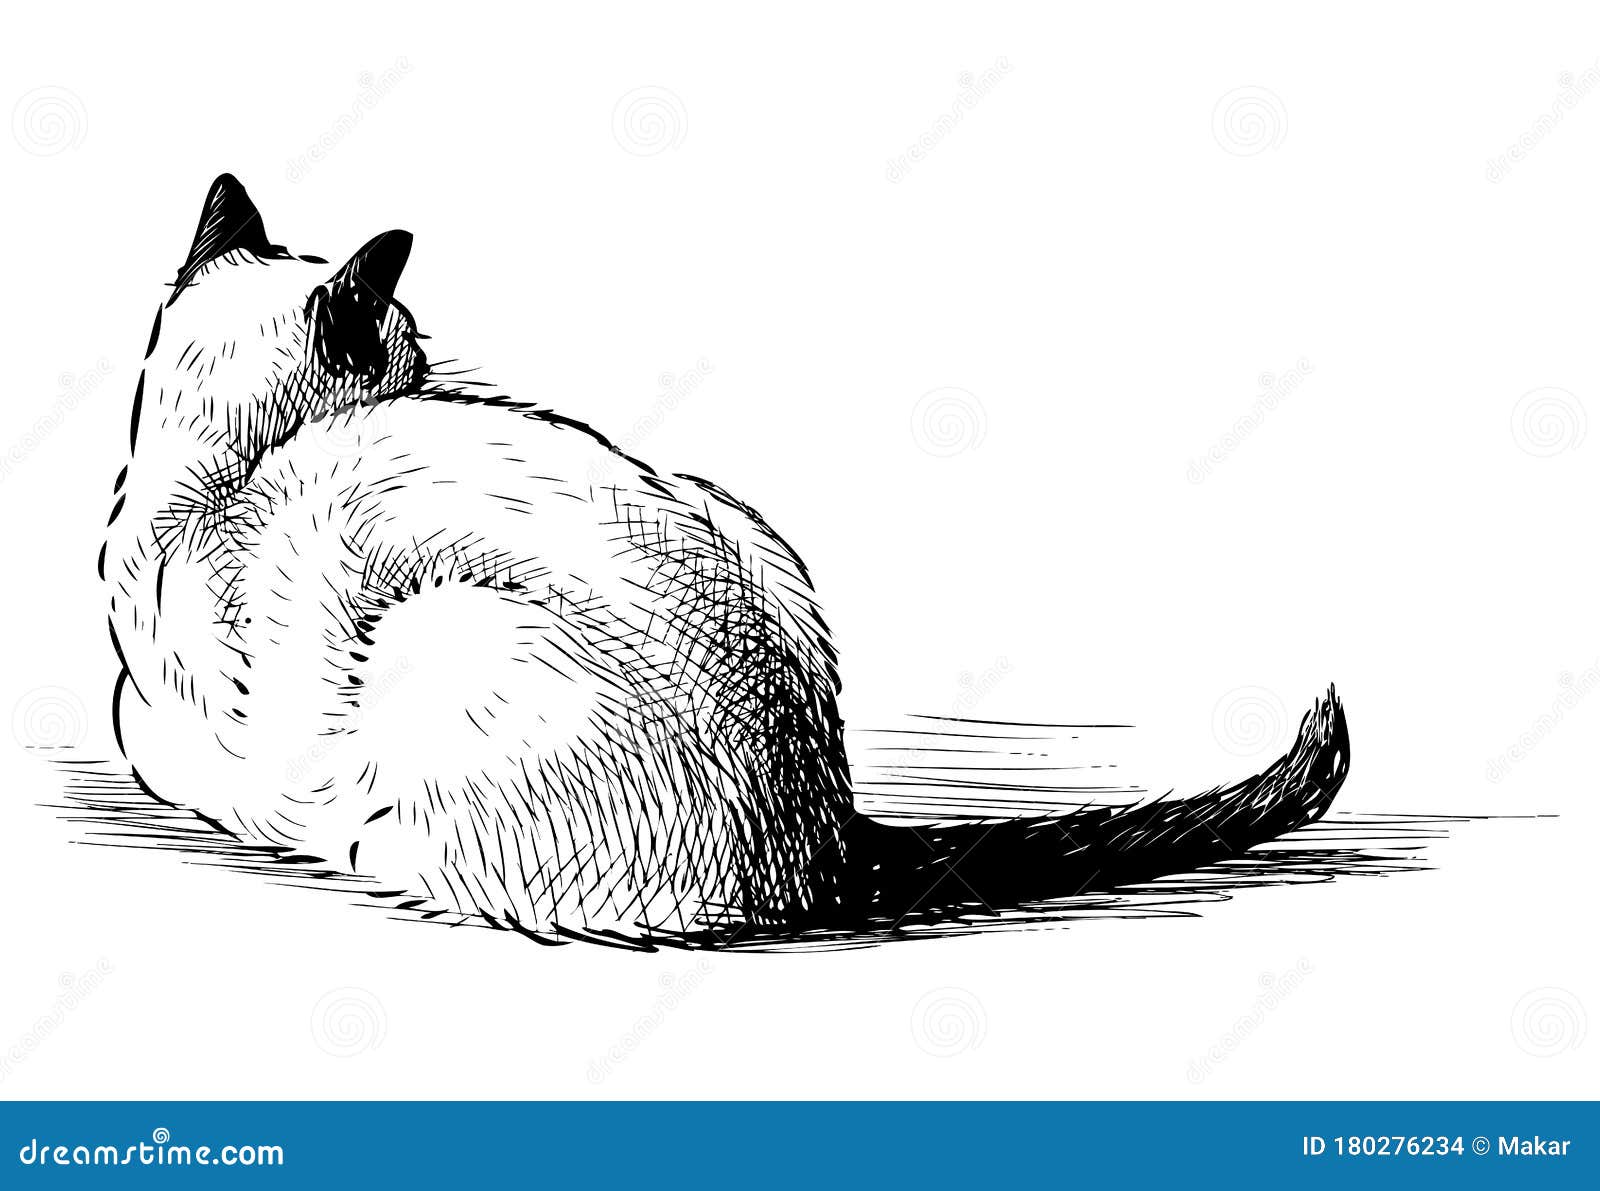 How to Draw a Cat Laying Down side view facing front simple sketch  tutorial beginner artist  up  YouTube